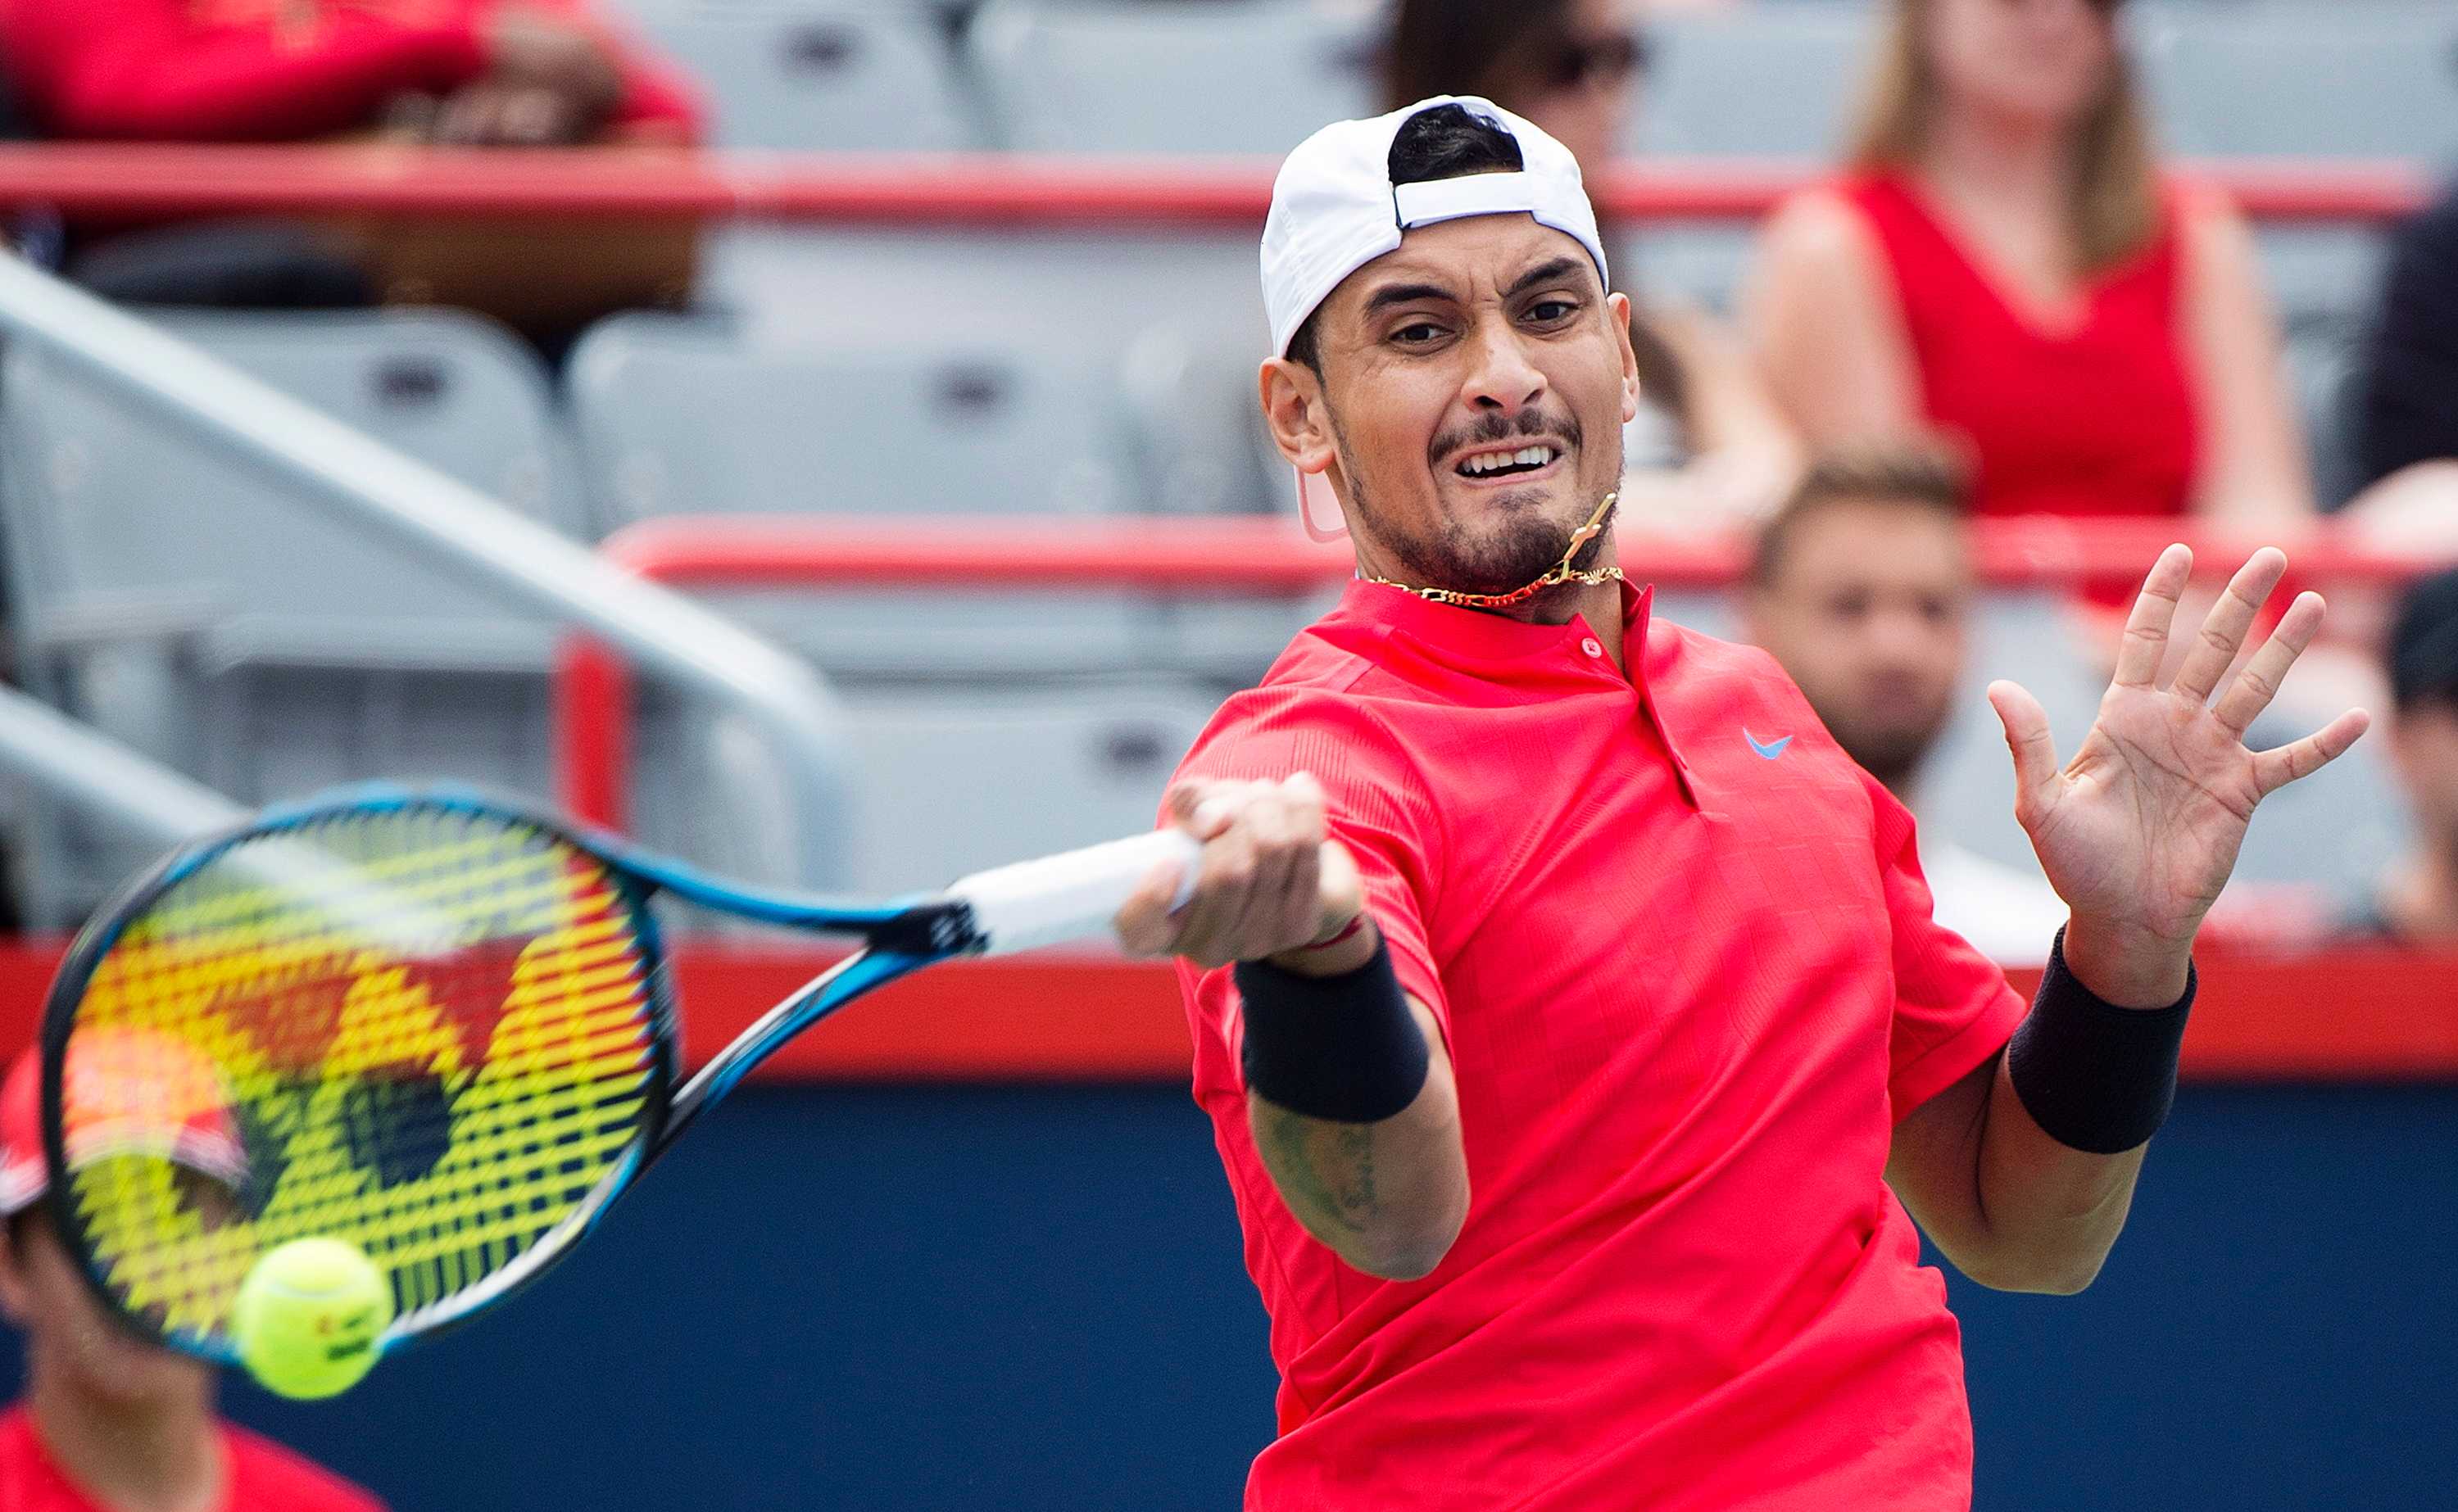 Nick Kyrgios makes fans day with practice hit at Montreal ATP World Tour event